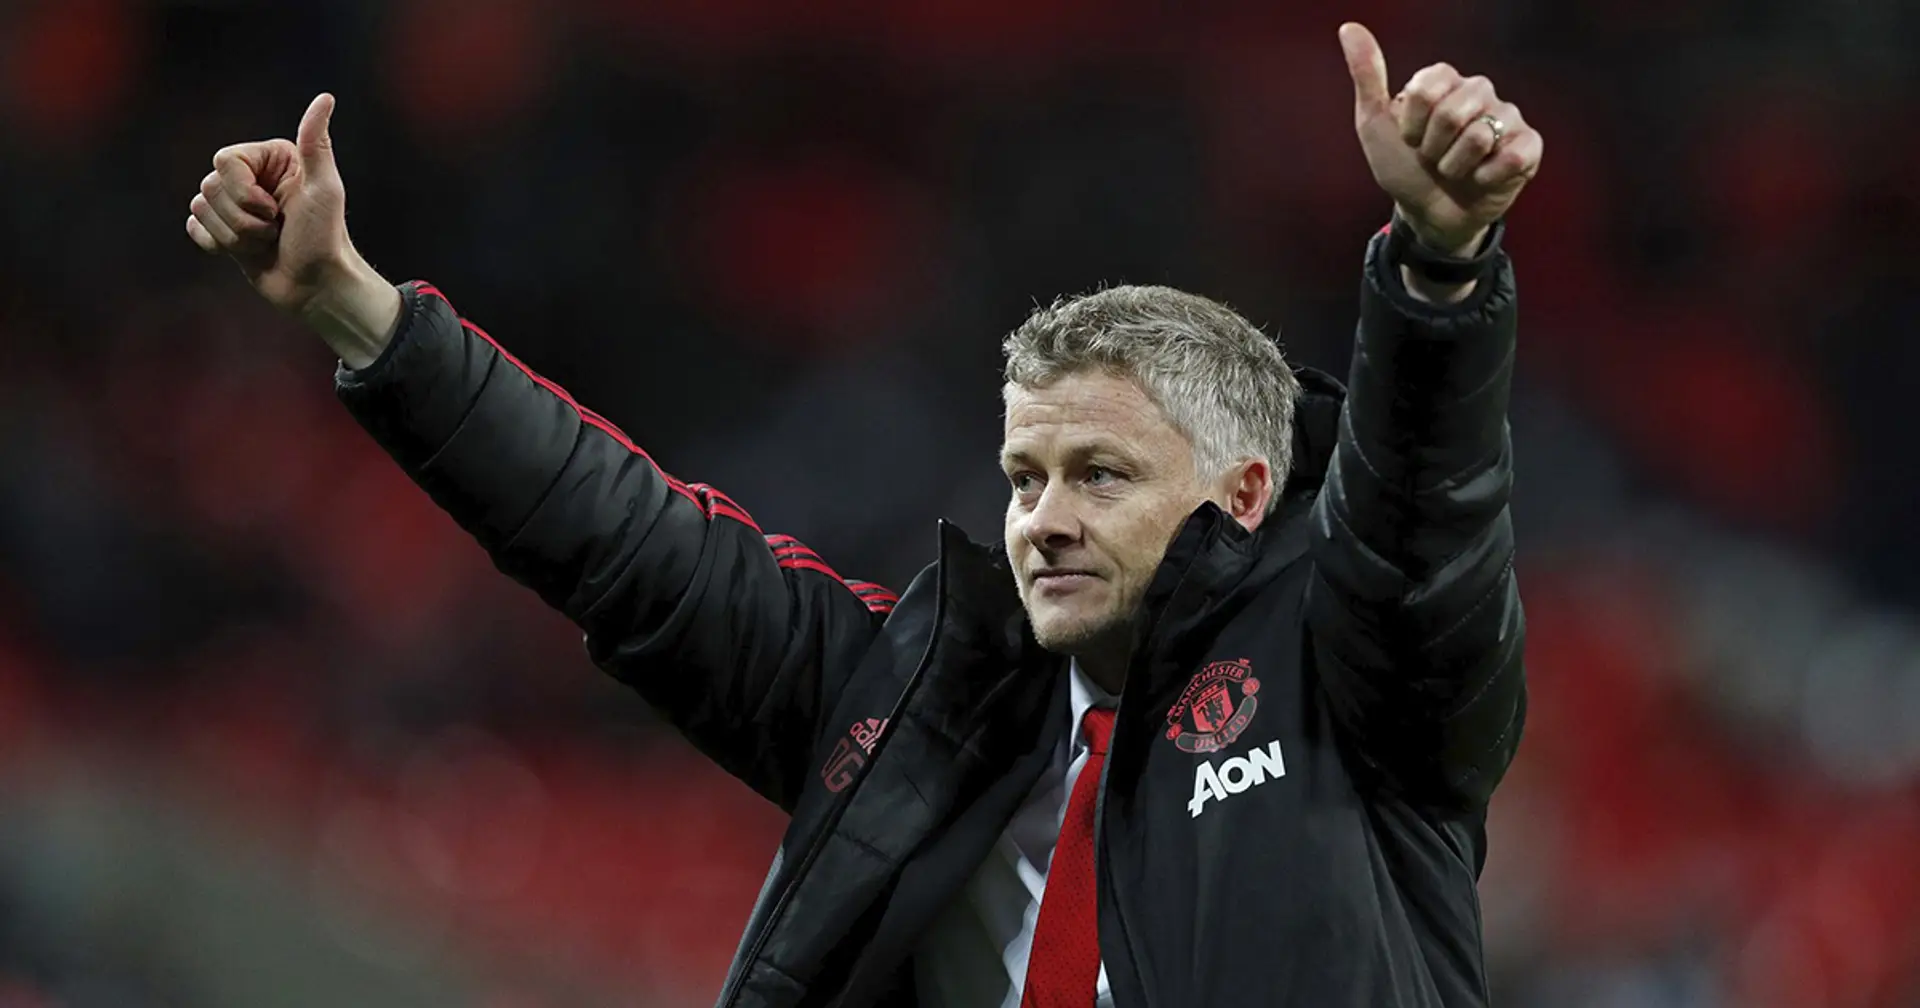 'Why are we so worried about this season if Ole is the right guy?': Fan explains why and how United should finish in top 4